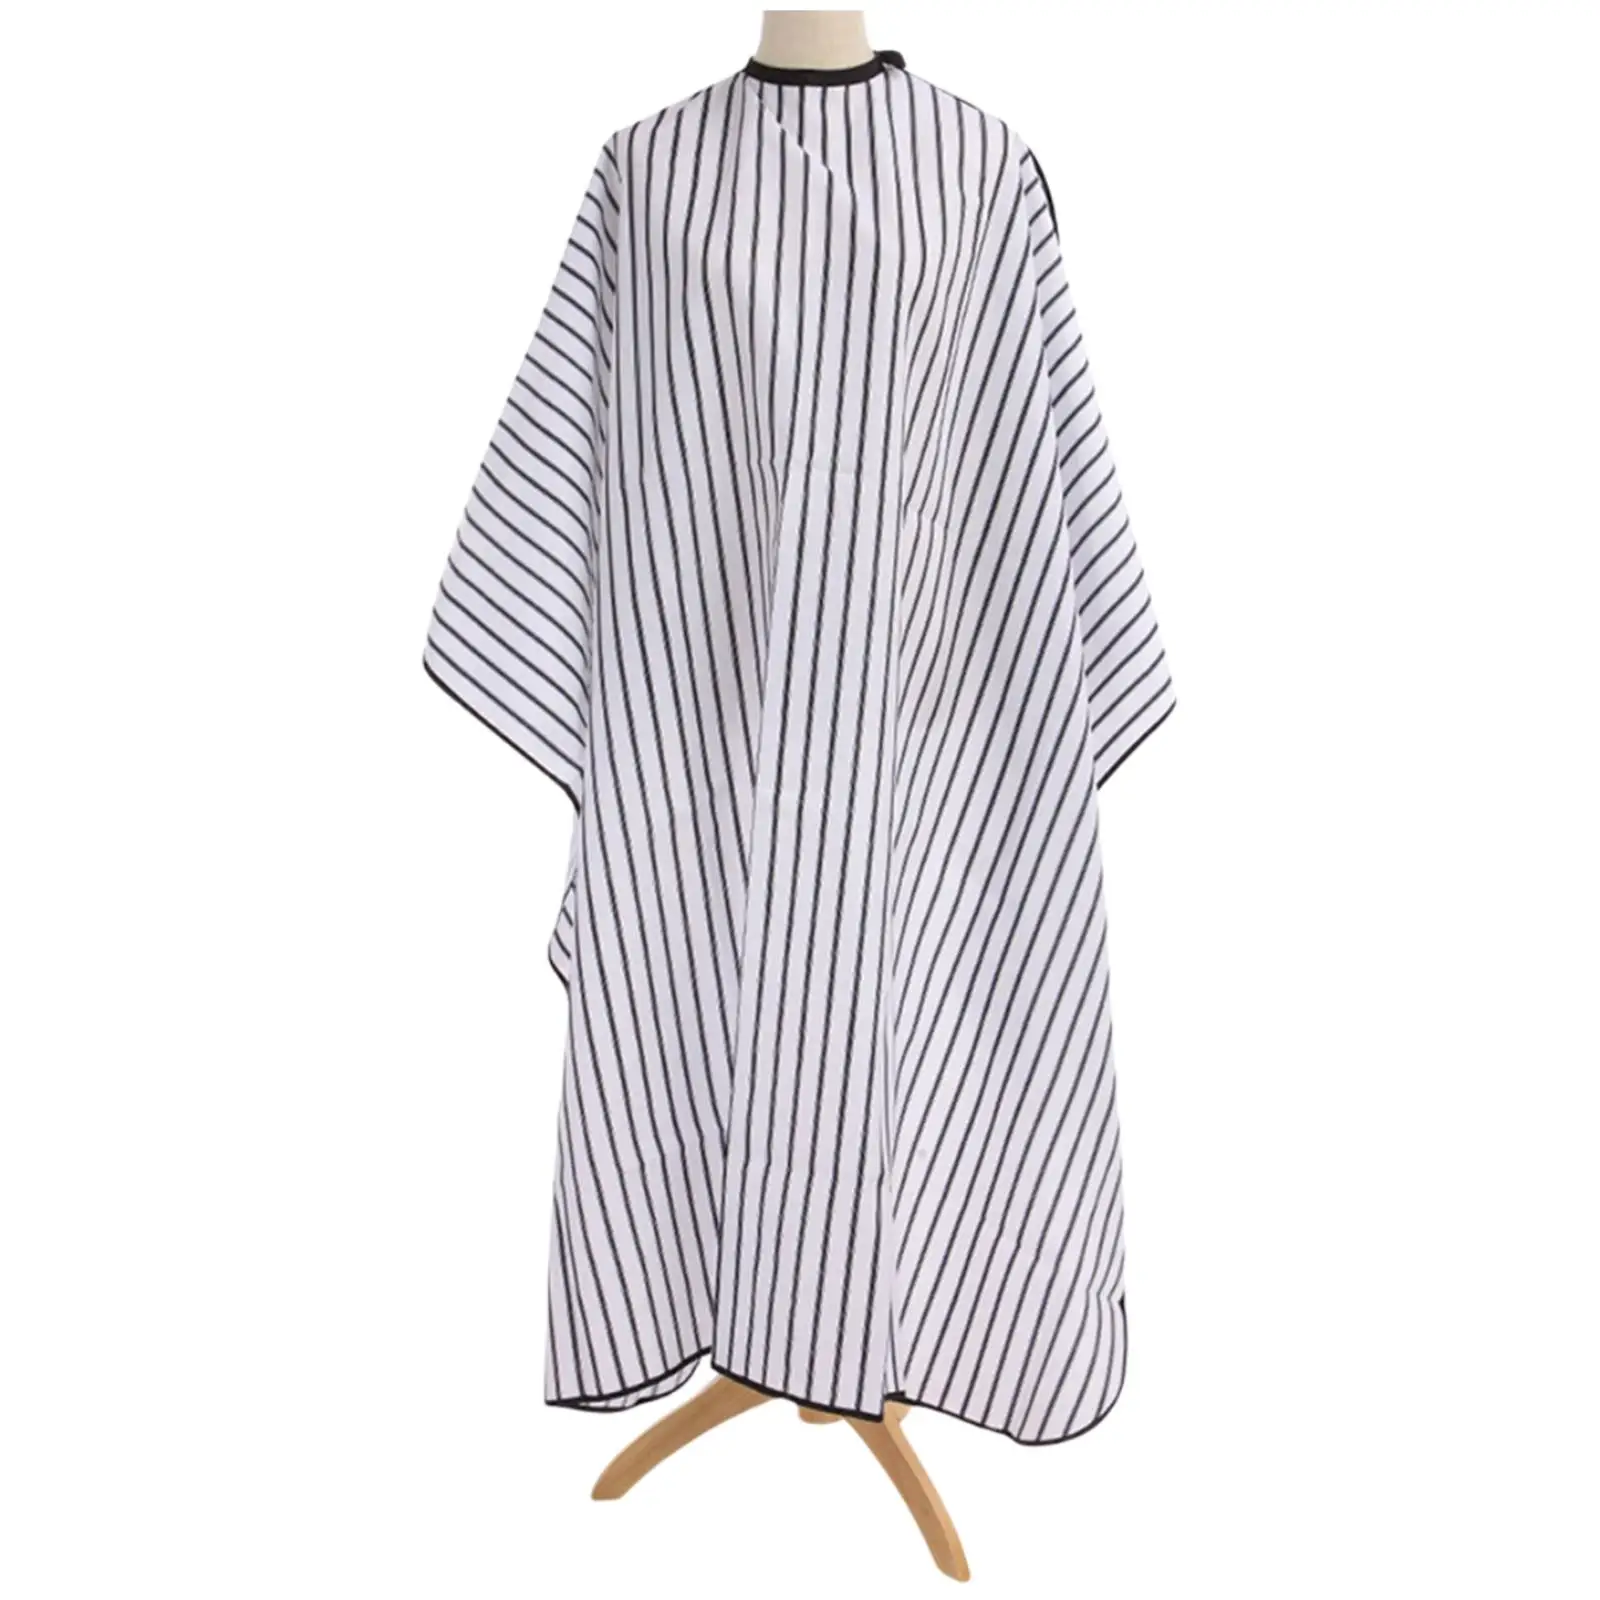 Hair Cutting Cape Stripe Pattern for Hairdresser Salon Hairdressing Gown